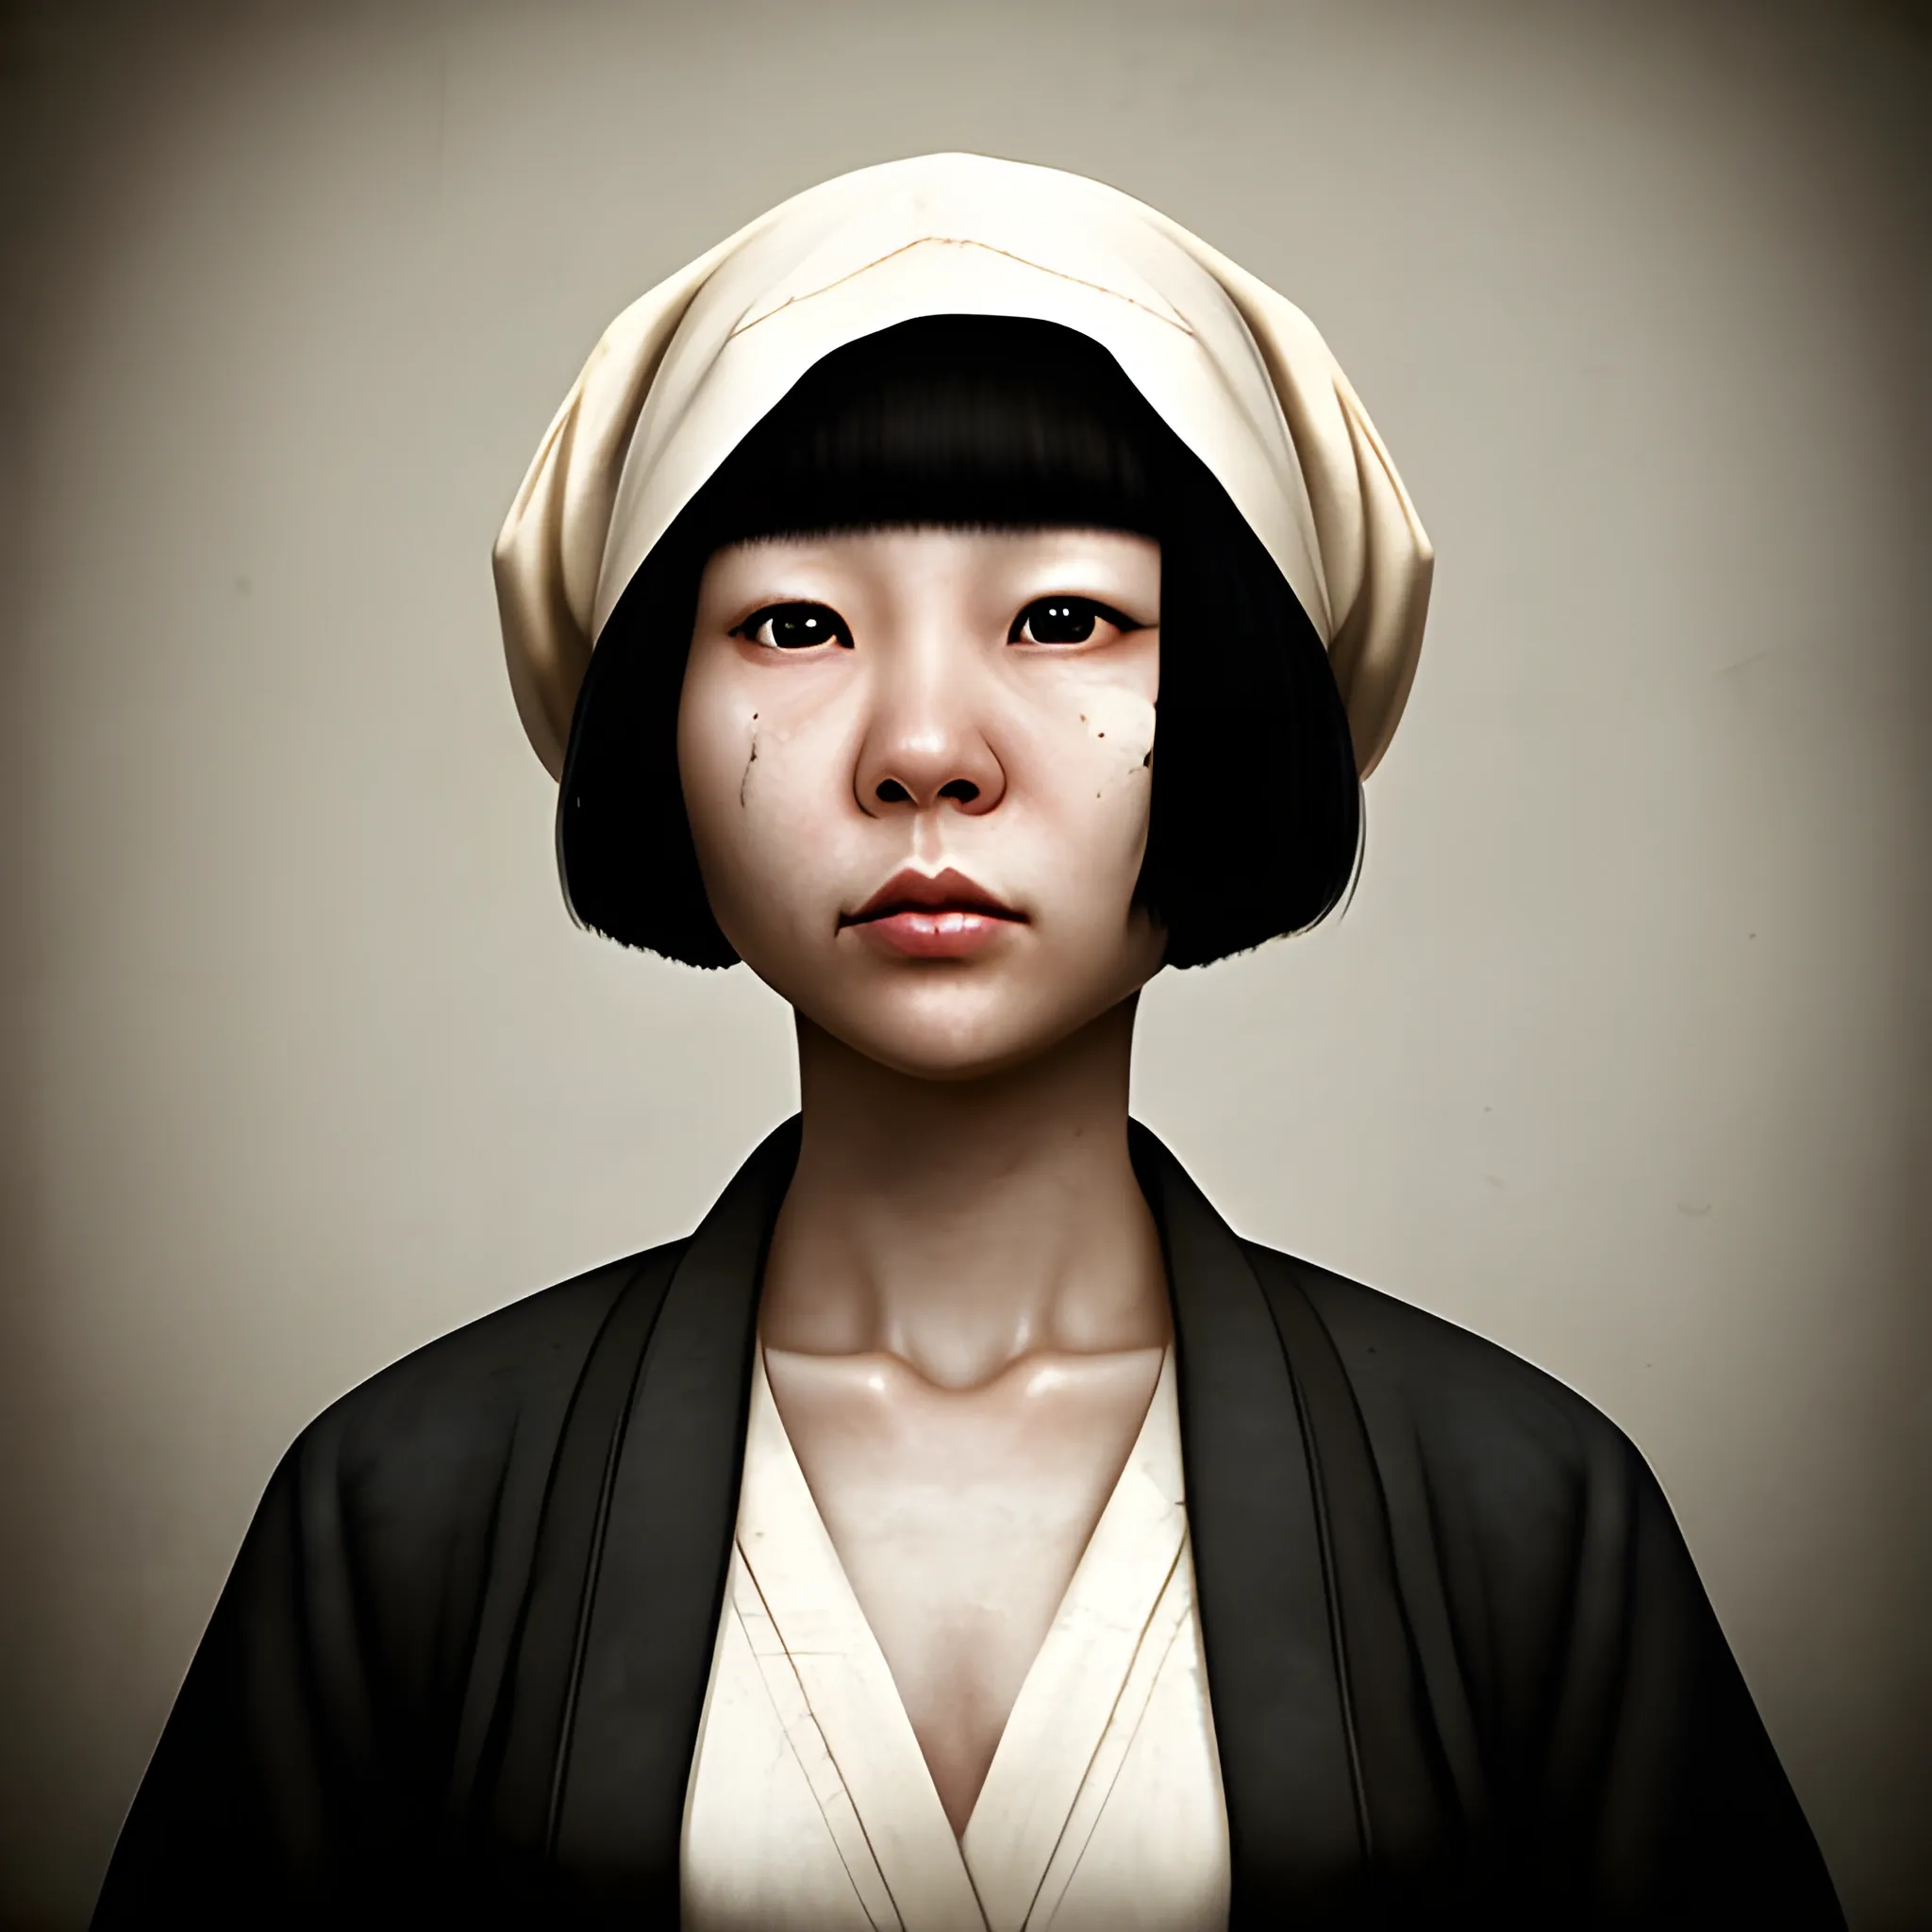 In the style of fallout 1, (masterpiece), (portrait photography), (portrait of an adult Chinese female), no makeup, flat chested, homeless clothes, dirty white robes, bob-cut hairstyle, black hair, black eyes